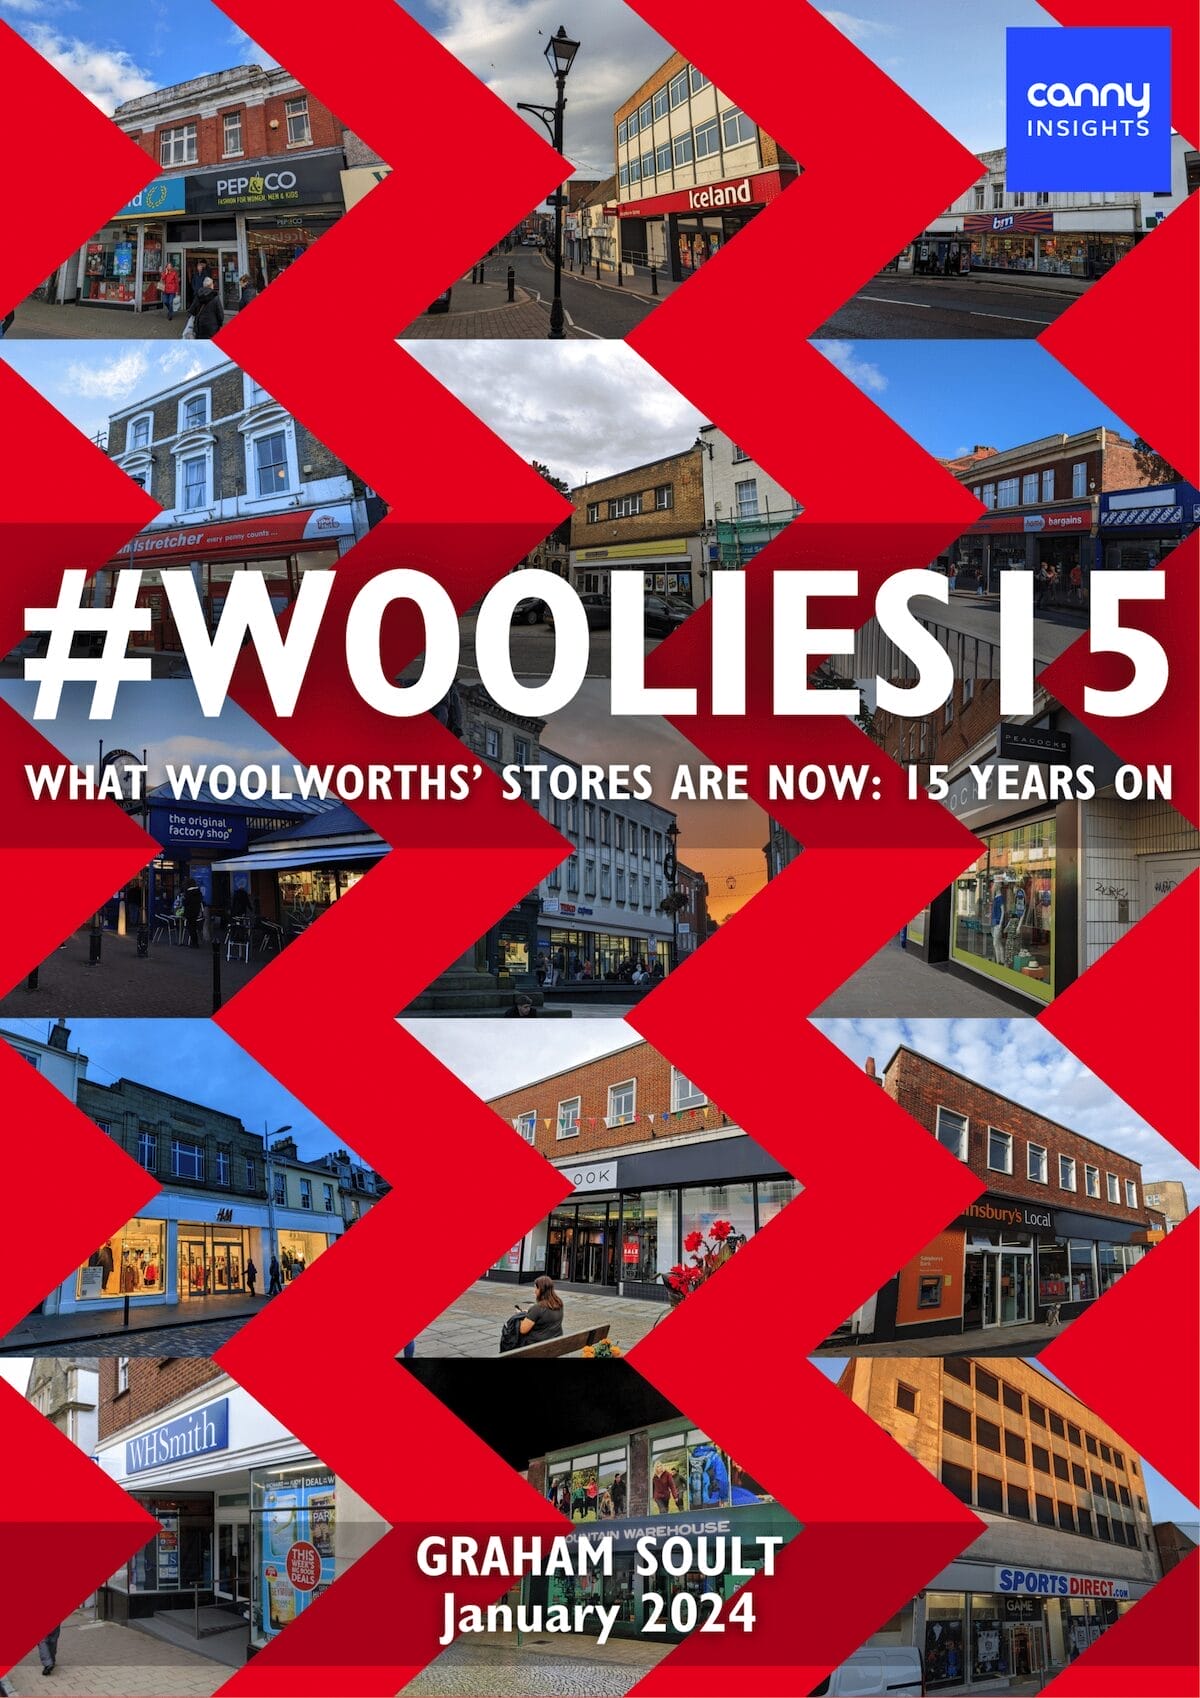 Positive trends evident on anniversary of Woolworths’ closure.